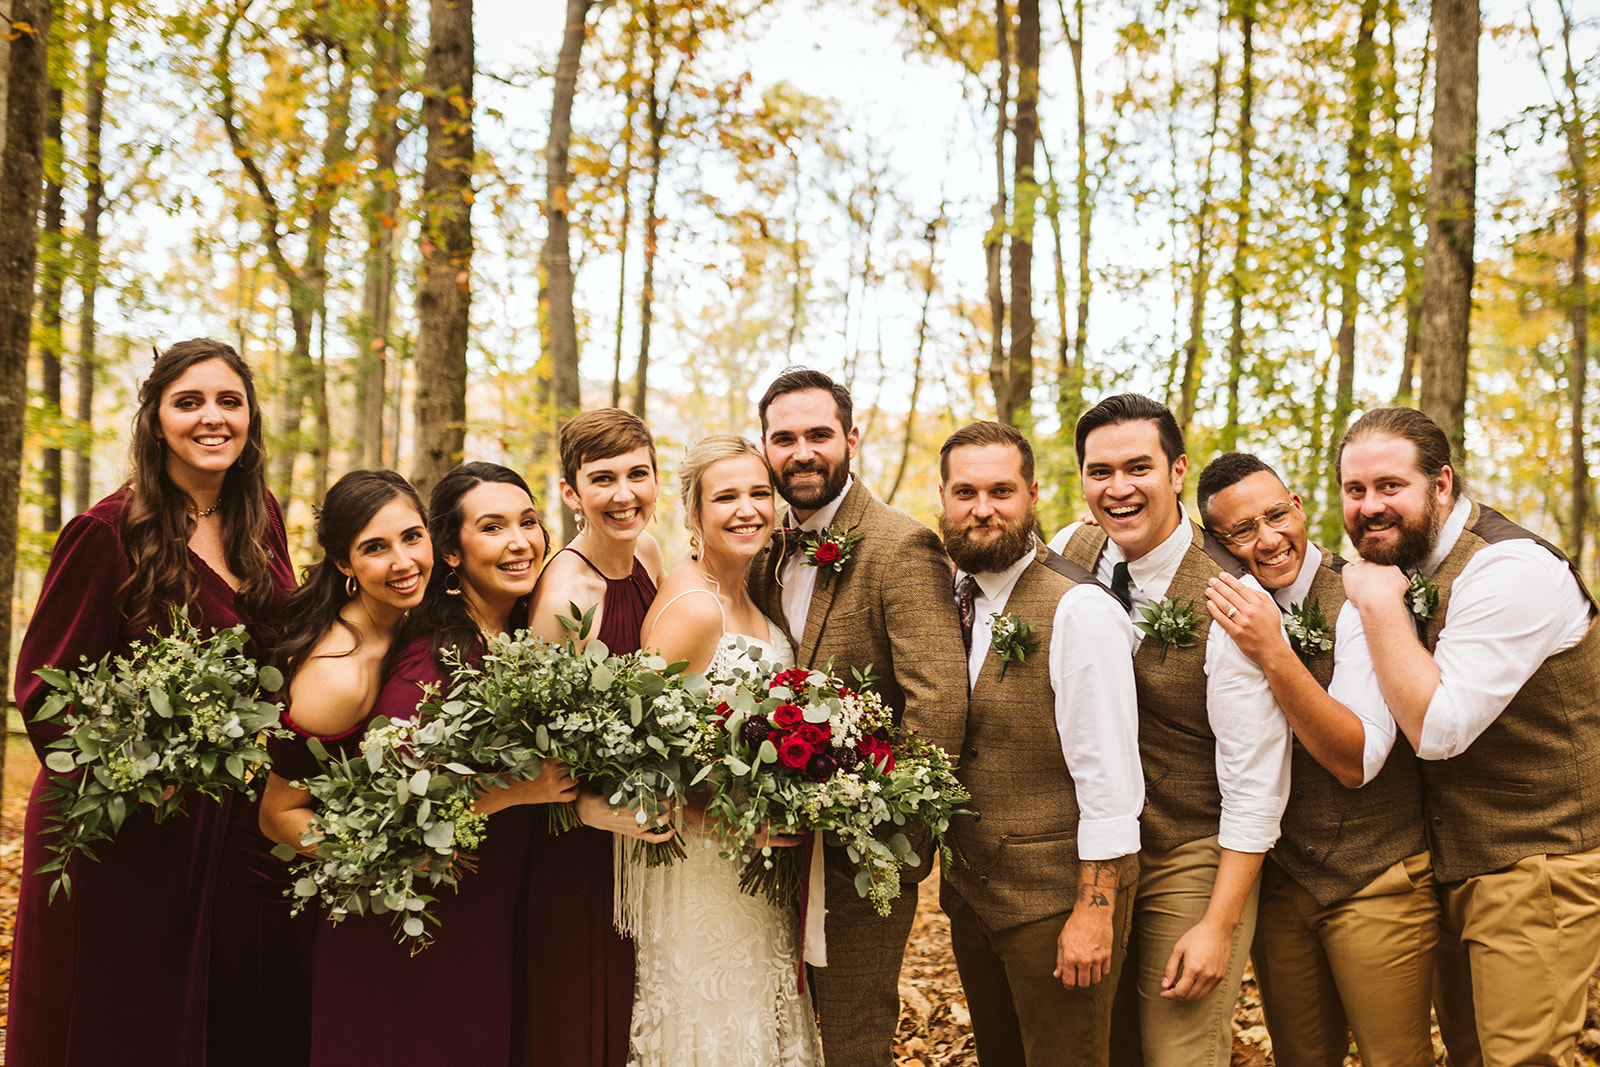 A bride and groom pose with their bridal party in a forest in fall.